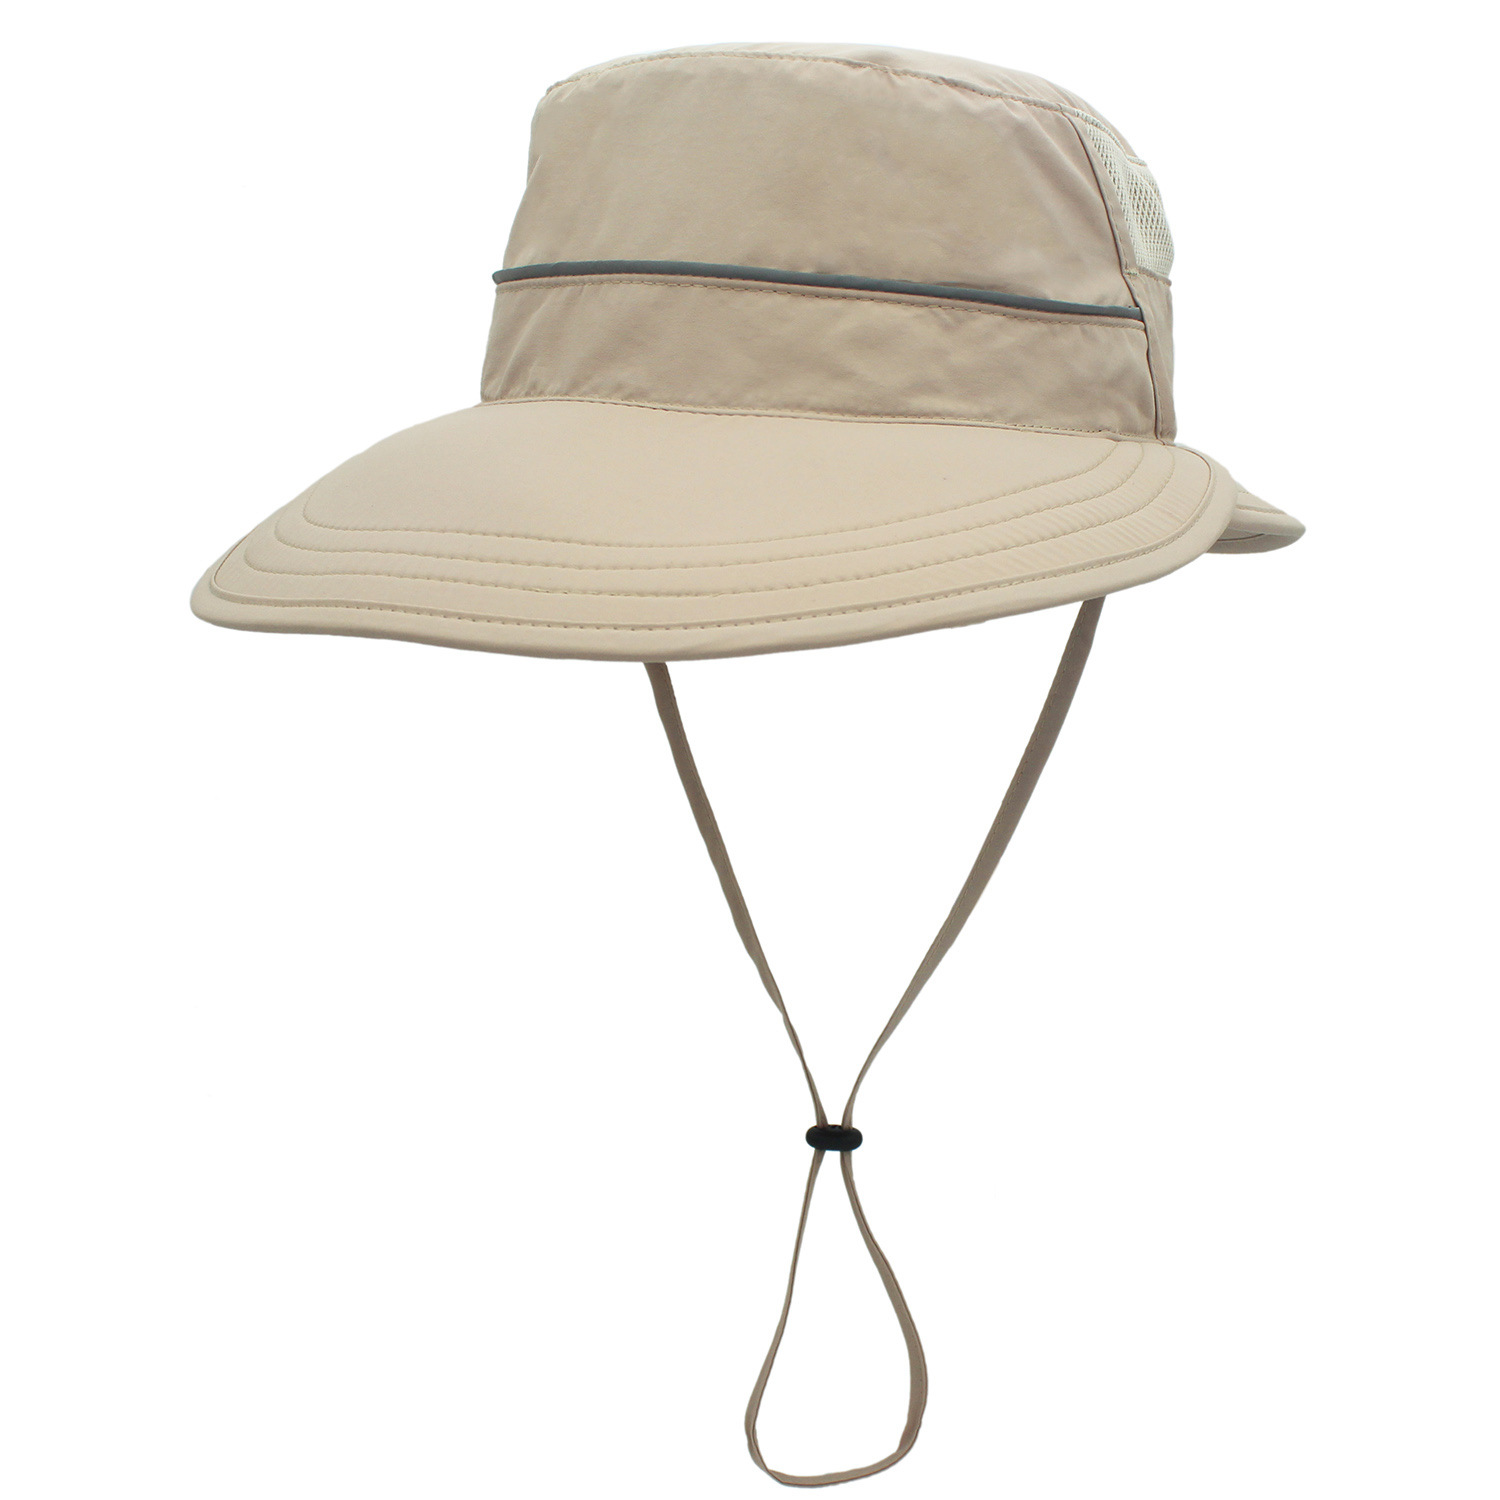 Outfly Pear-Shaped Sun Hat 2022 Hat Female Summer New Sunscreen Fishing Hat Outdoor Mountaineering Bucket Hat